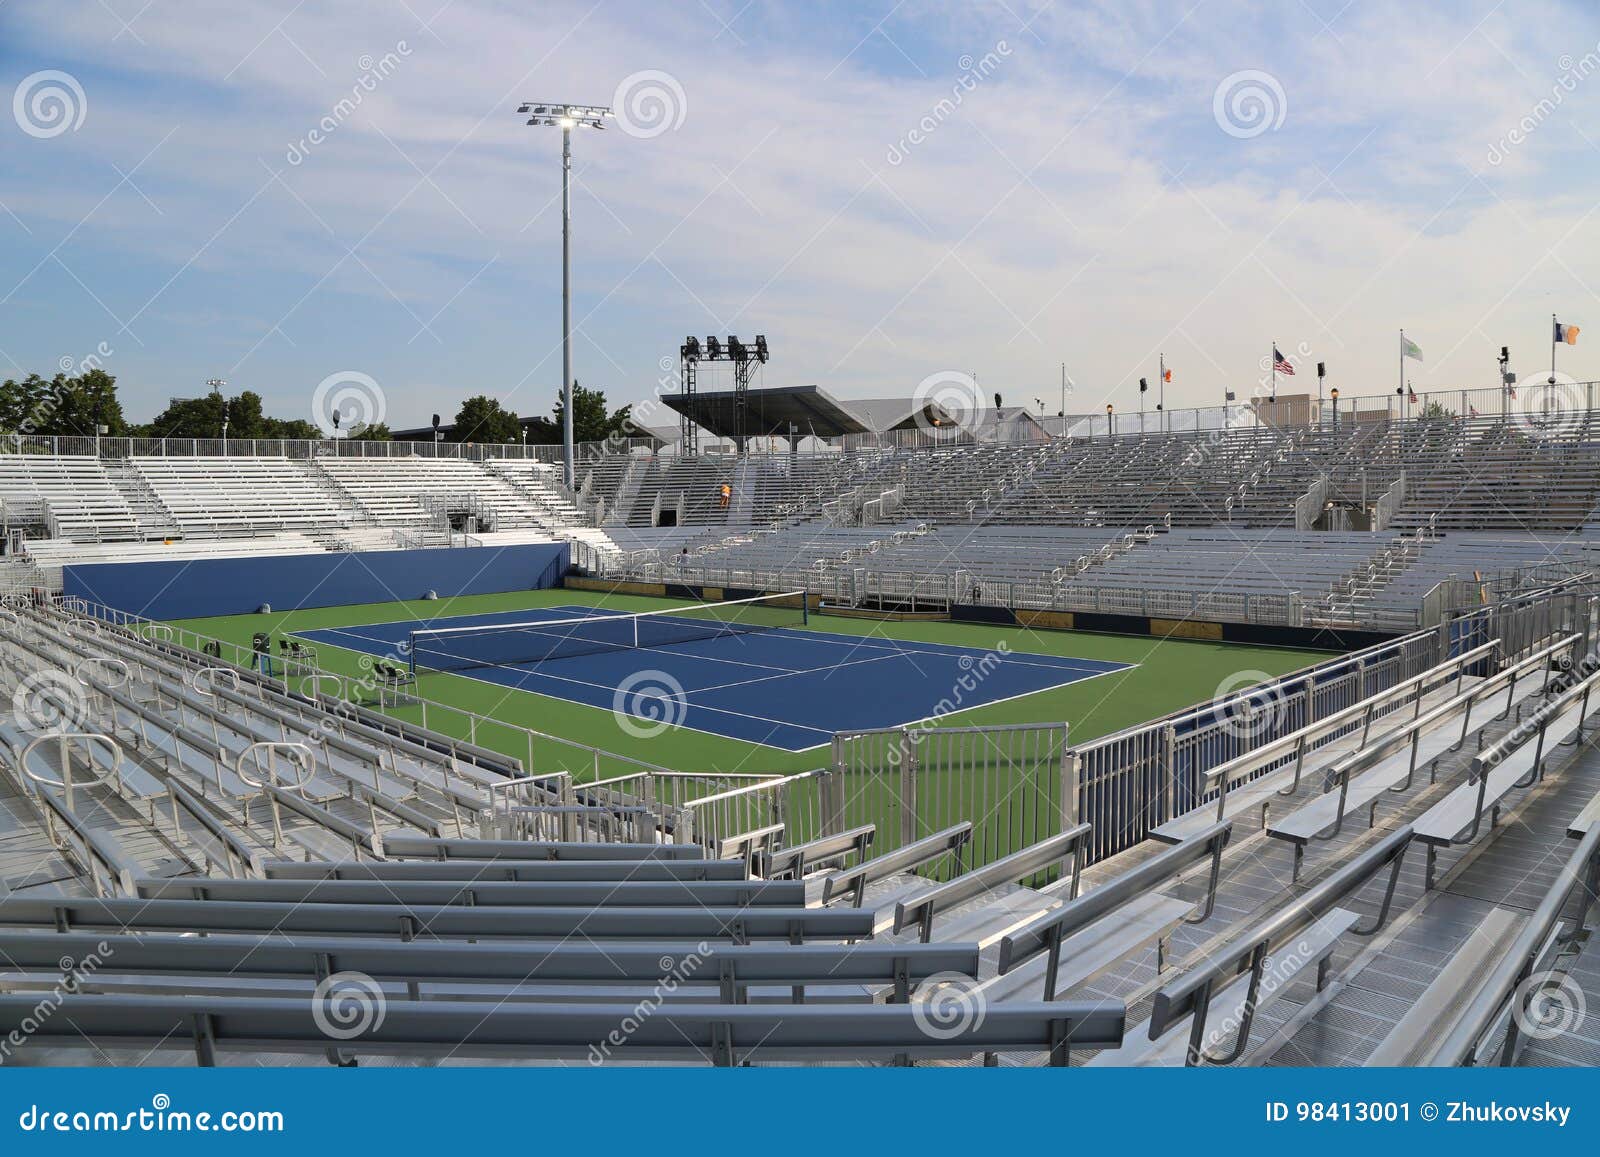 Temporary Louis Armstrong Stadium At The Billie Jean King National Tennis Center Ready For US ...